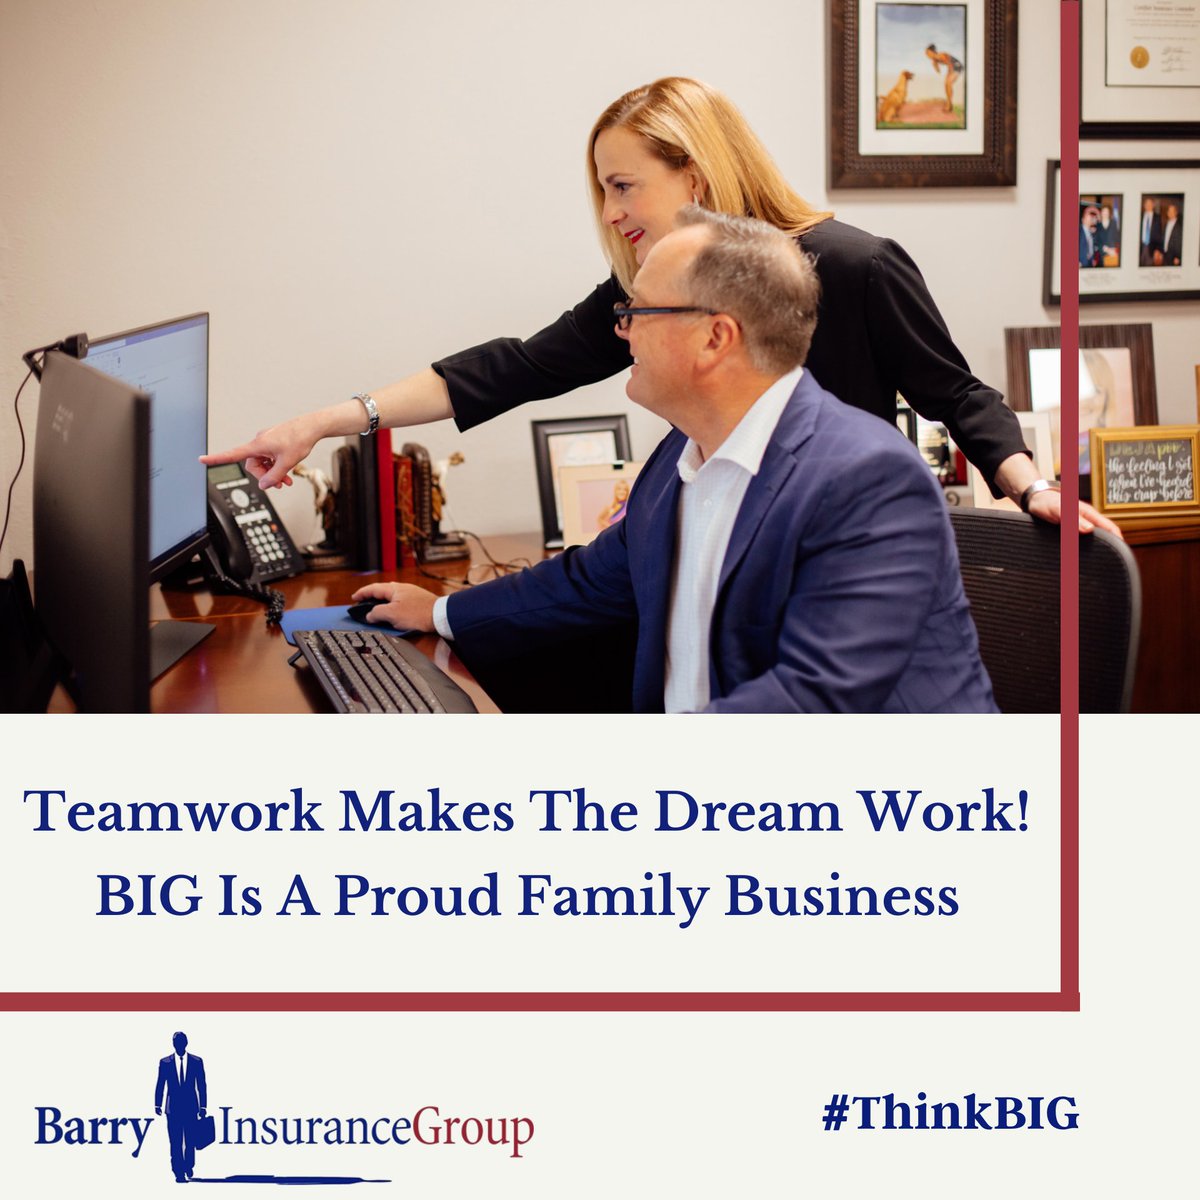 Teamwork makes the dream work! 👫 Reviewing policies with a partner in crime to ensure our clients get the best coverage: rb.gy/90ksv6

#InsuranceExperts #FamilyBusiness